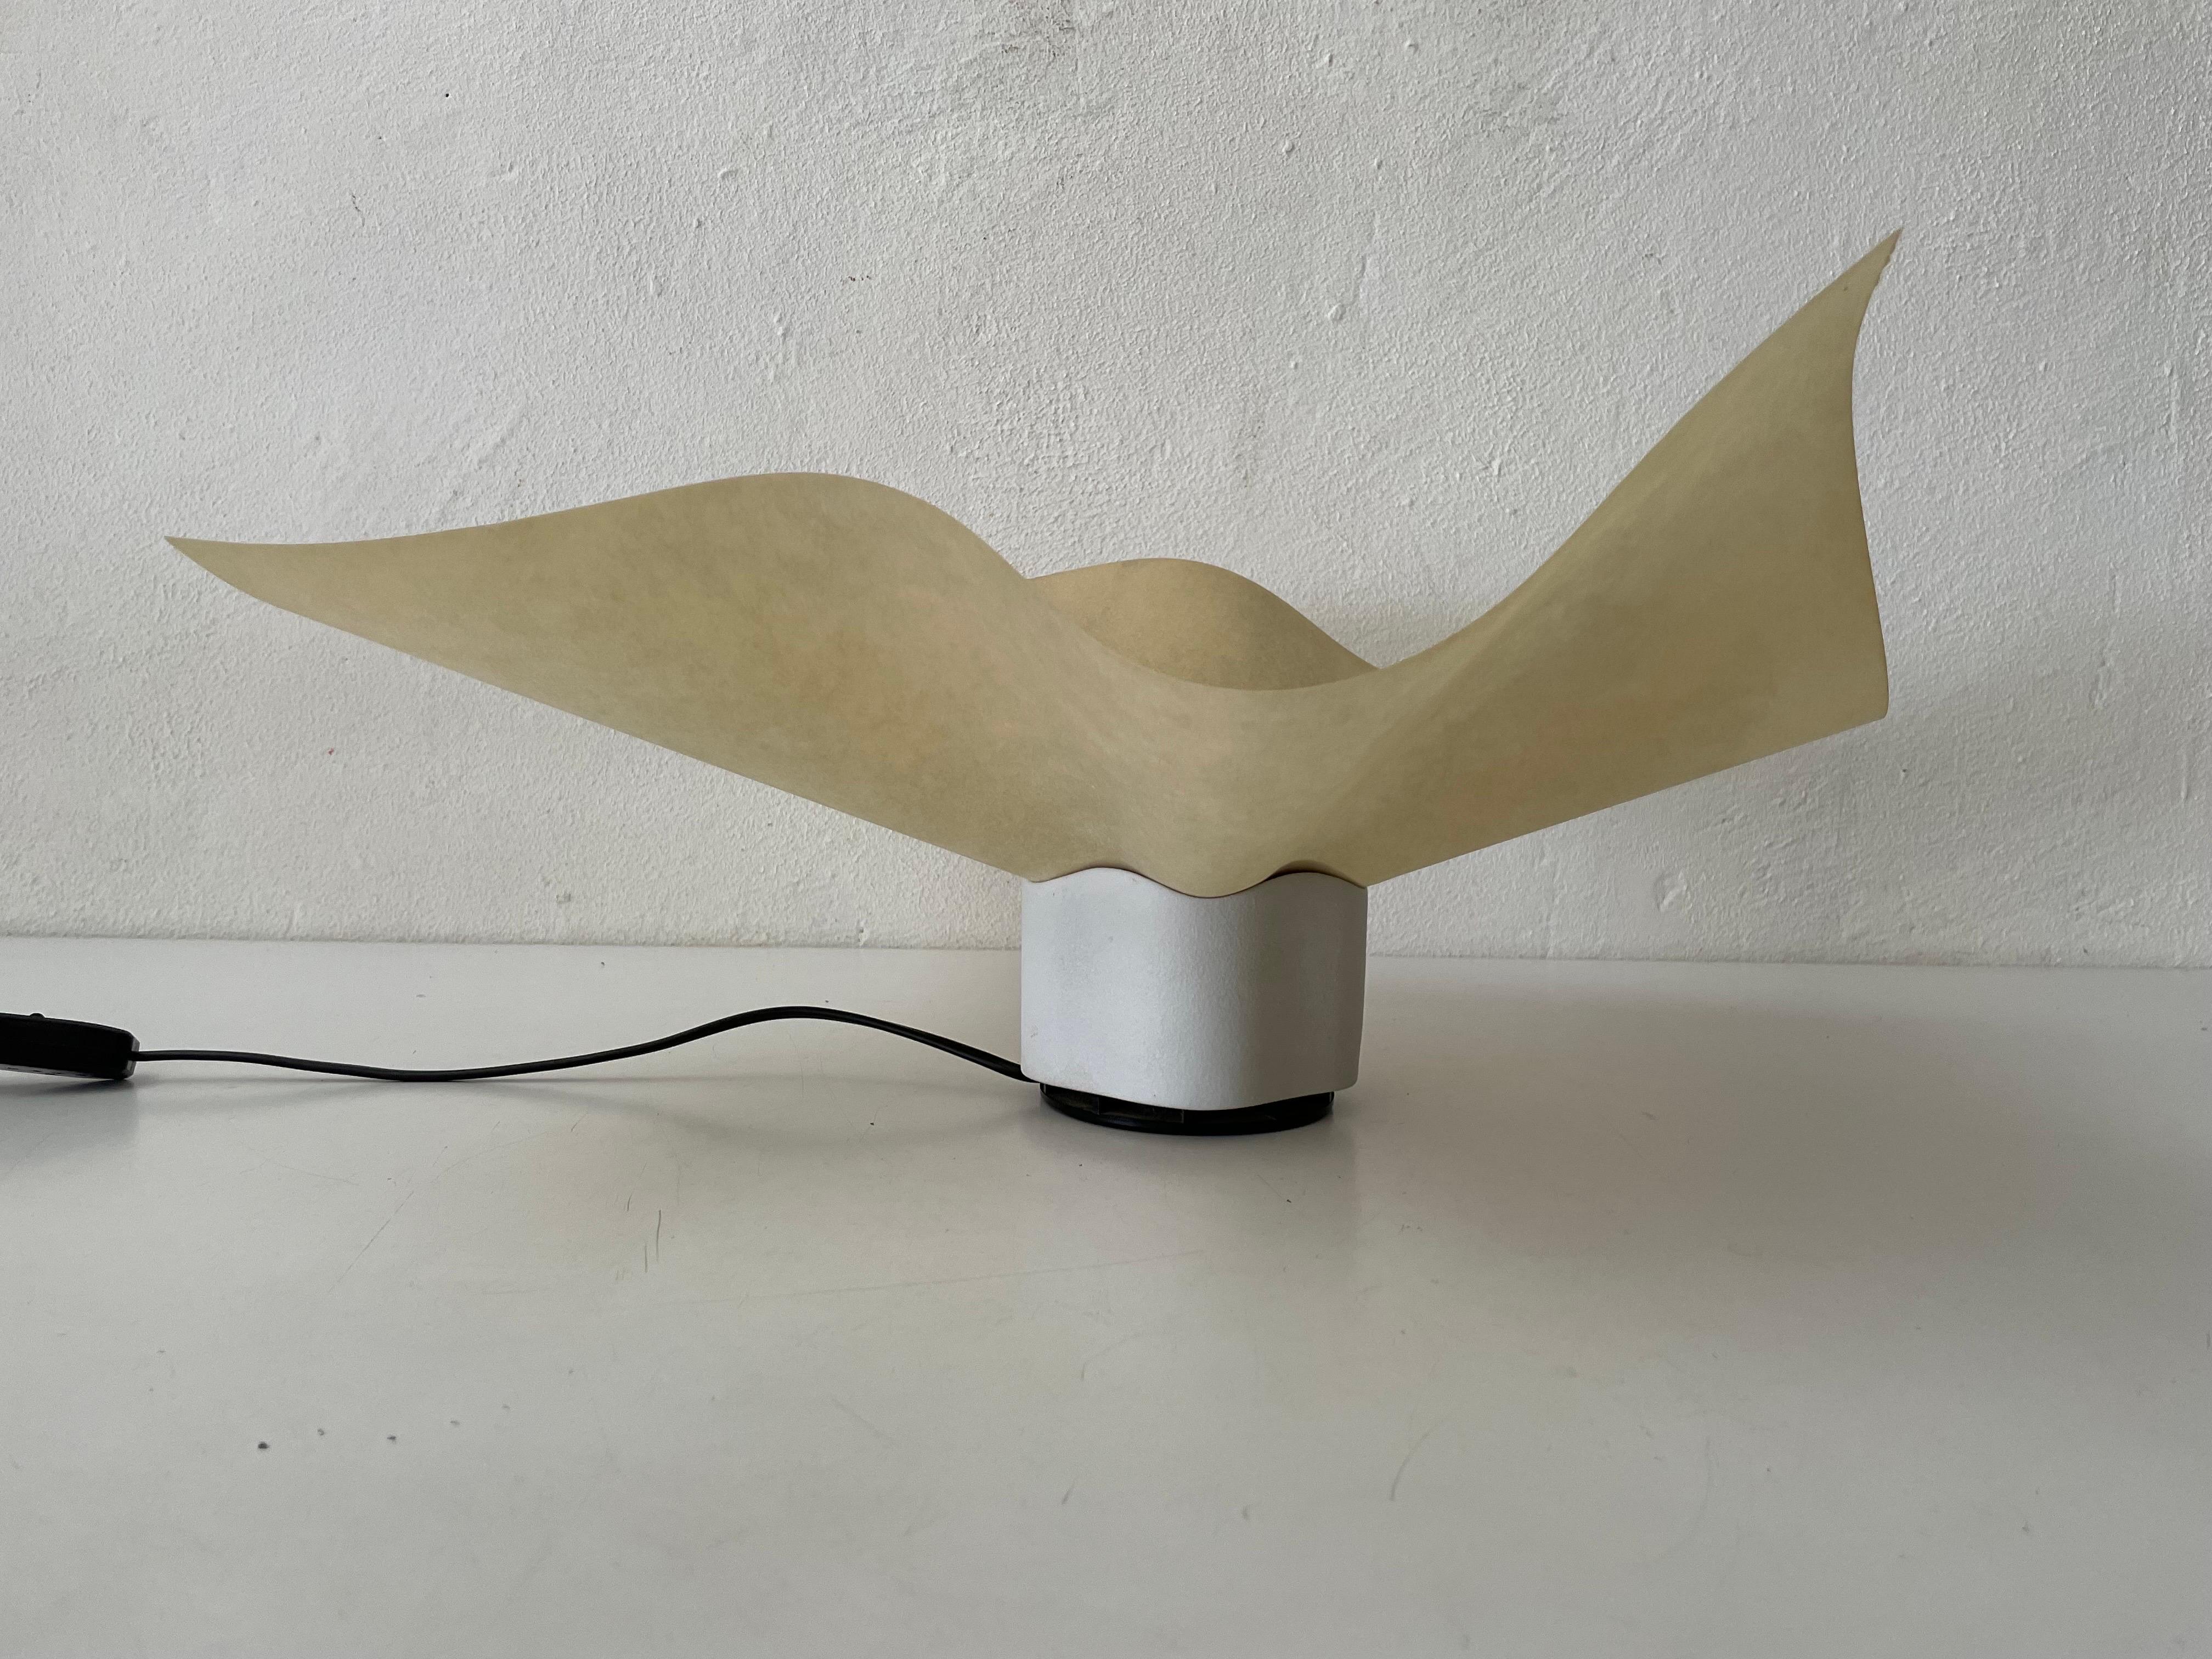 Exclusive Table Lamp by Mario Bellini for Artemide, 1970s, Italy

Lampshade is in good condition and very clean. 
This lamp works with E27 light bulb
Wired and suitable to use with 220V and 110V for all countries.

Measures: 
60 cm x 60 cm x 25